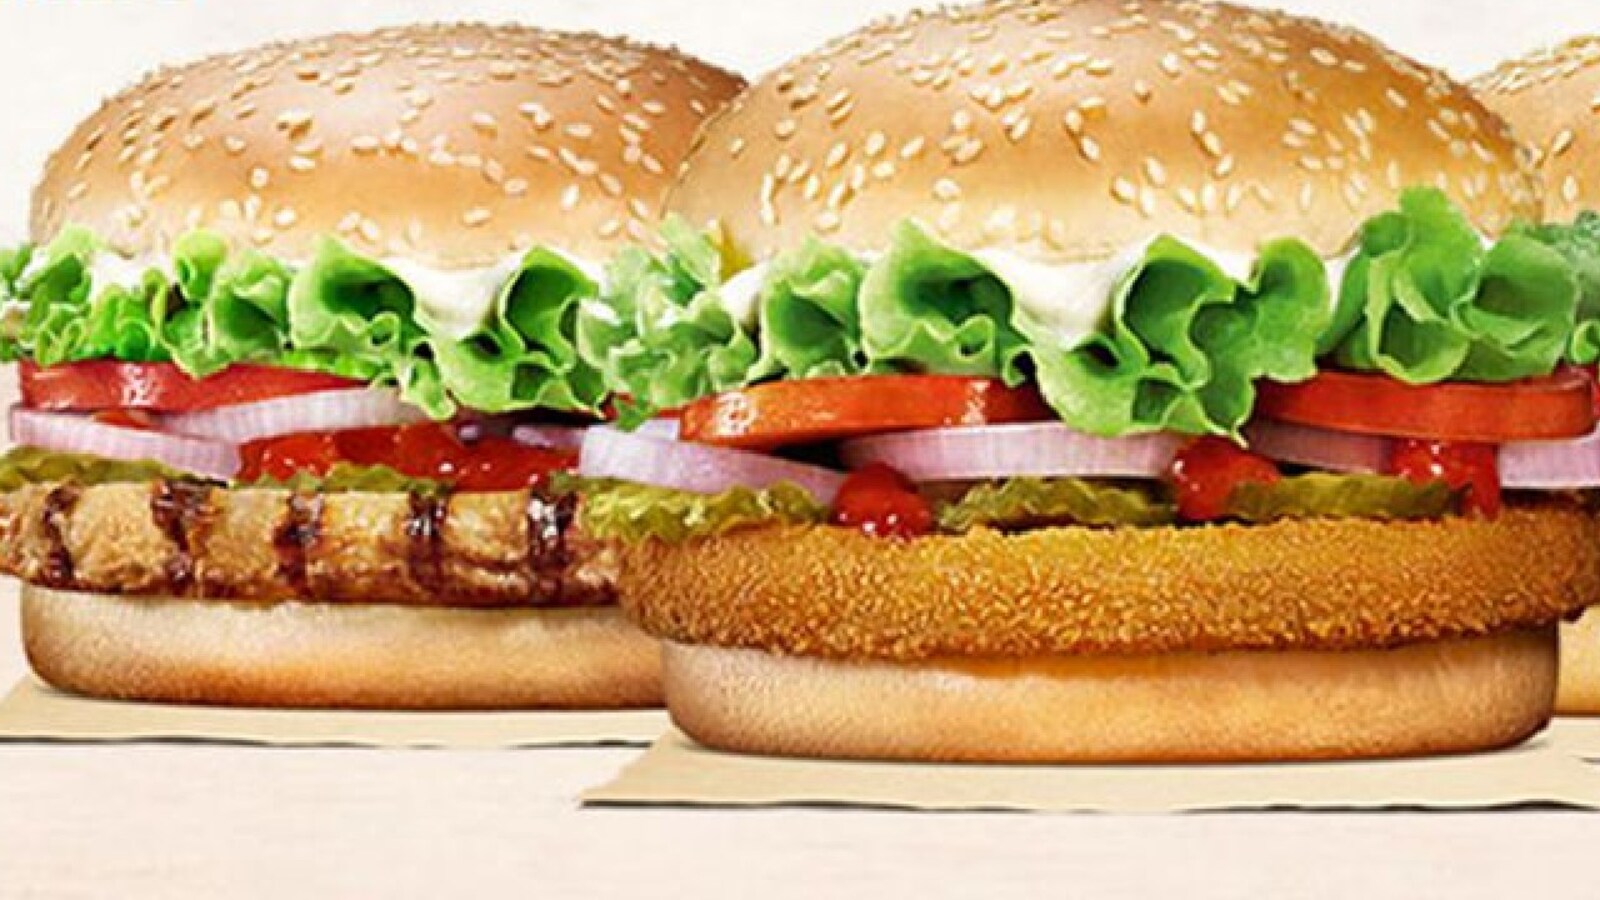 Burger King India launches QIP, sets floor price at Rs 136.05 per